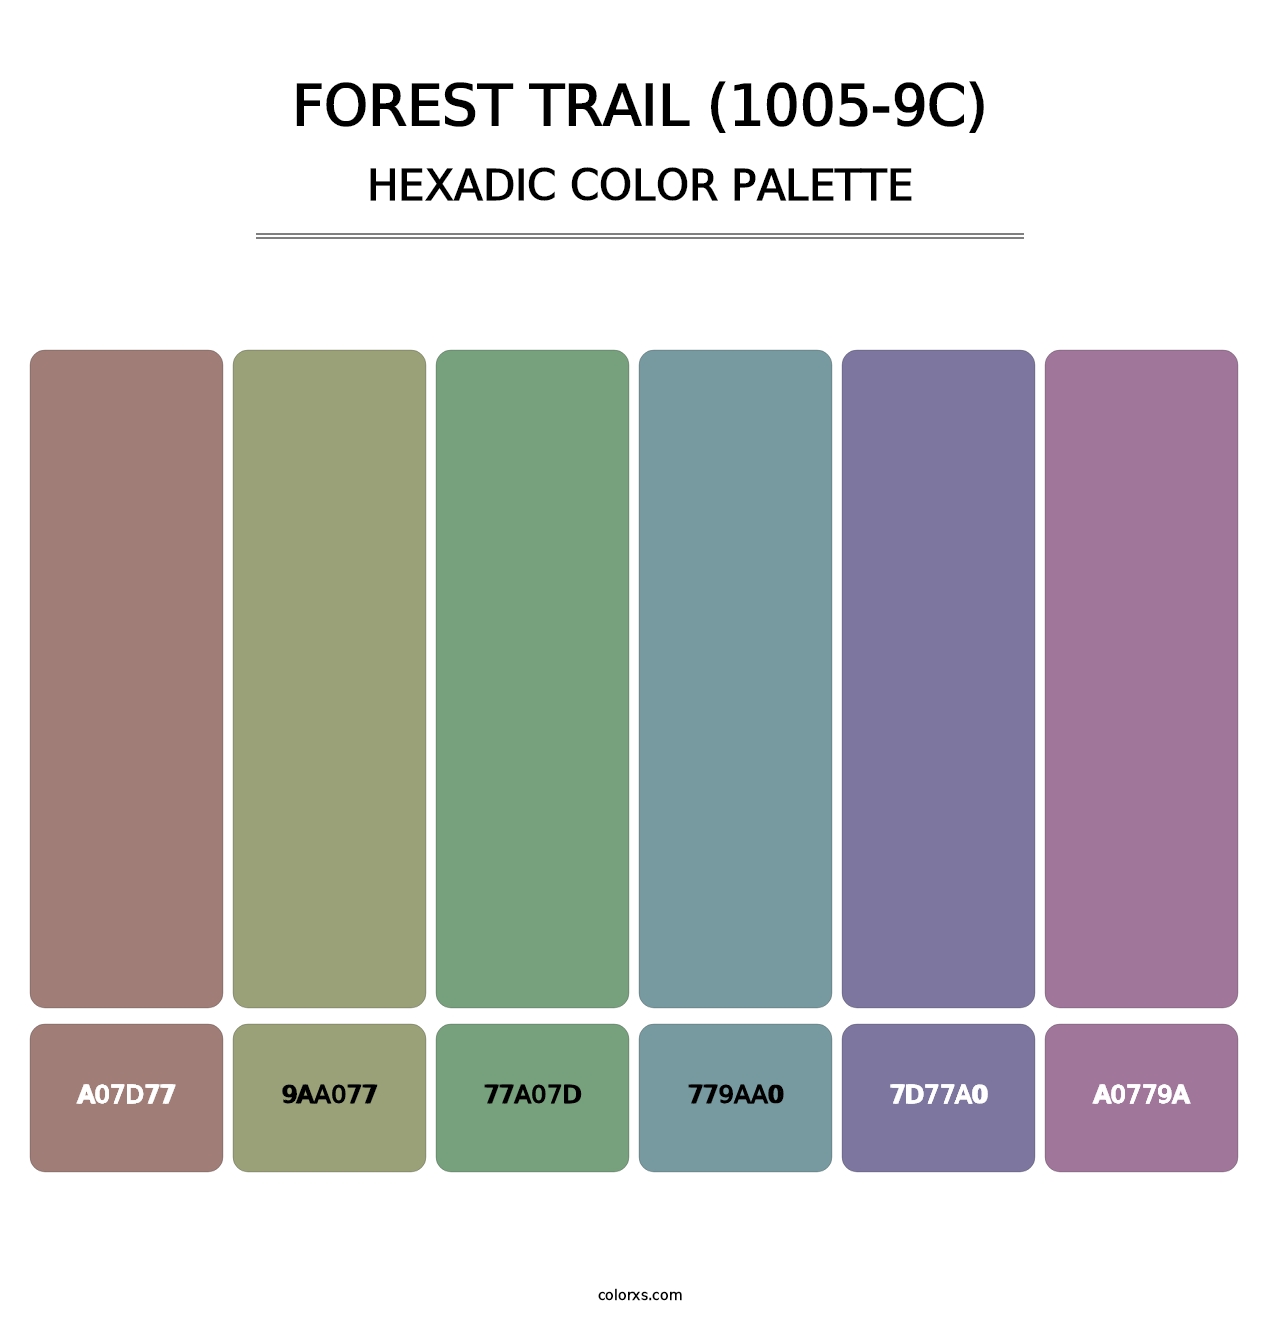 Forest Trail (1005-9C) - Hexadic Color Palette